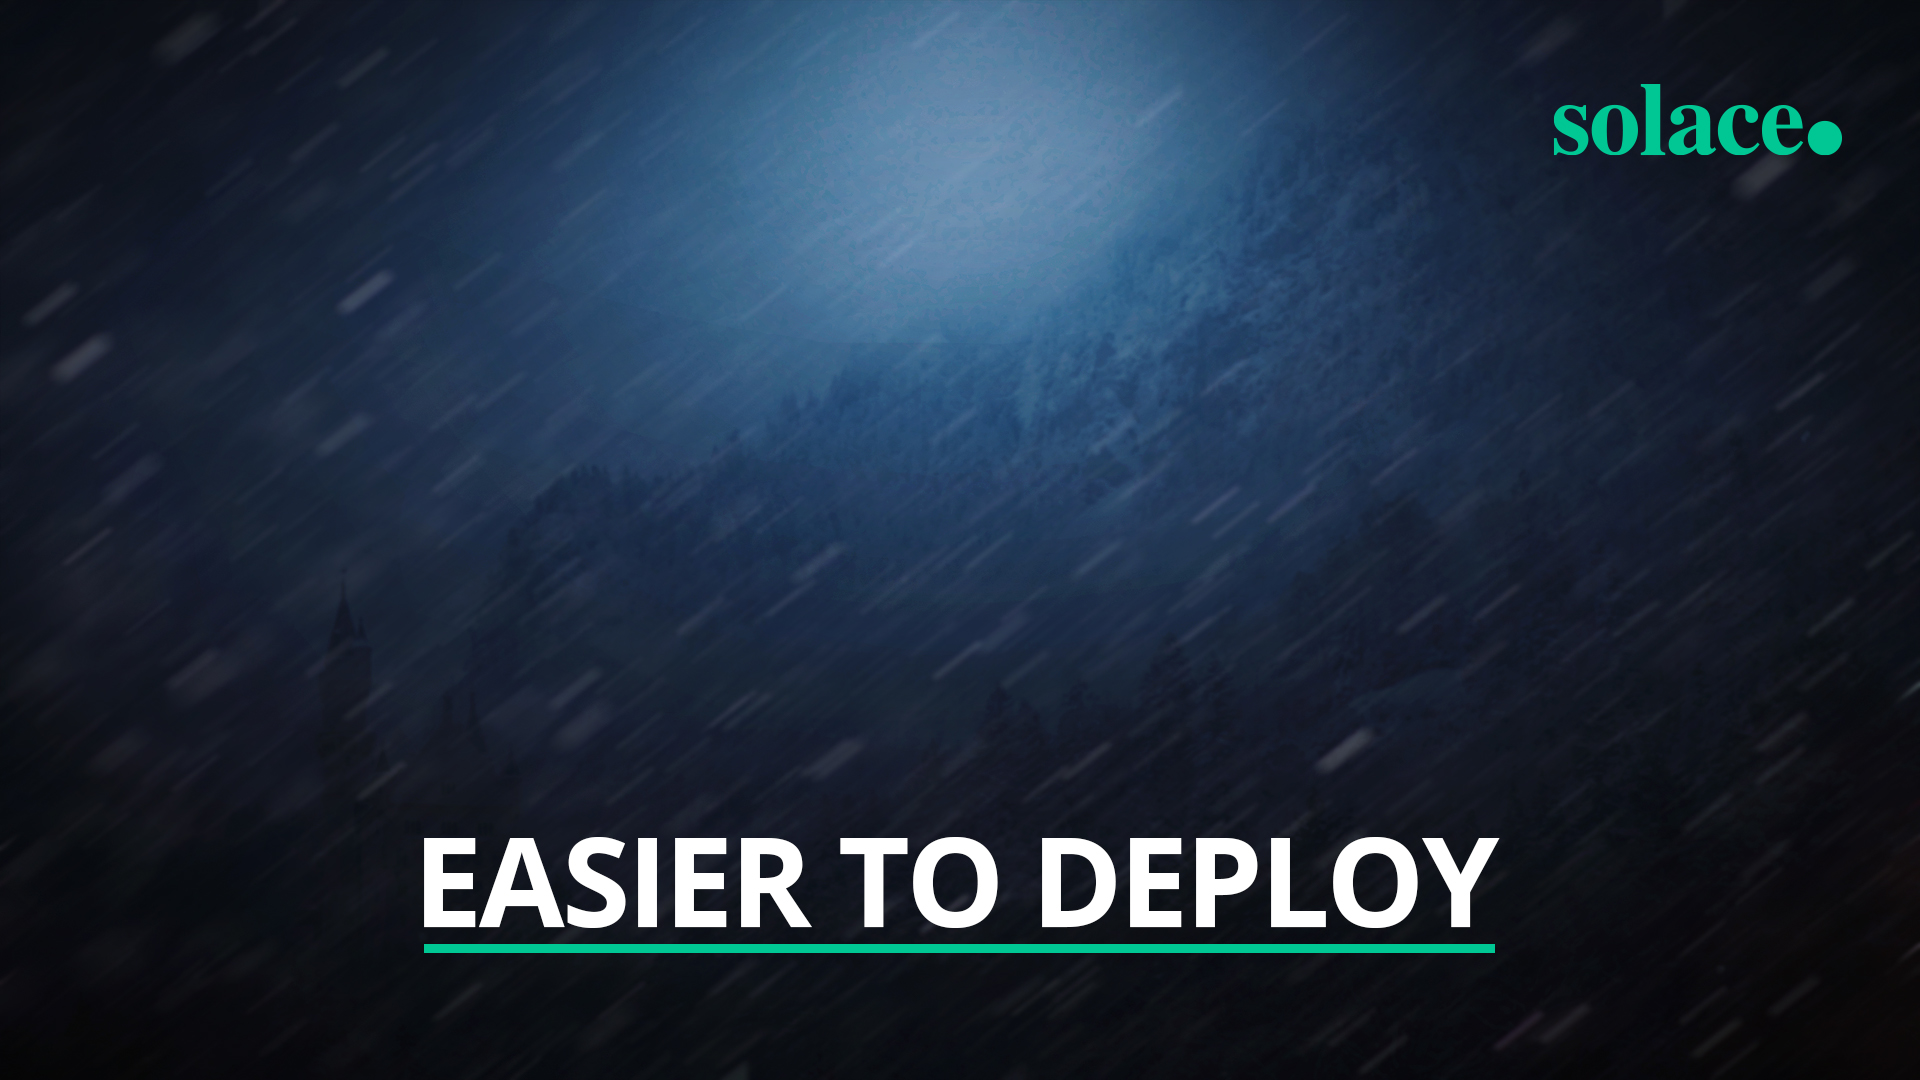 The Winter Solace Product Update 2021 - Easier to Deploy